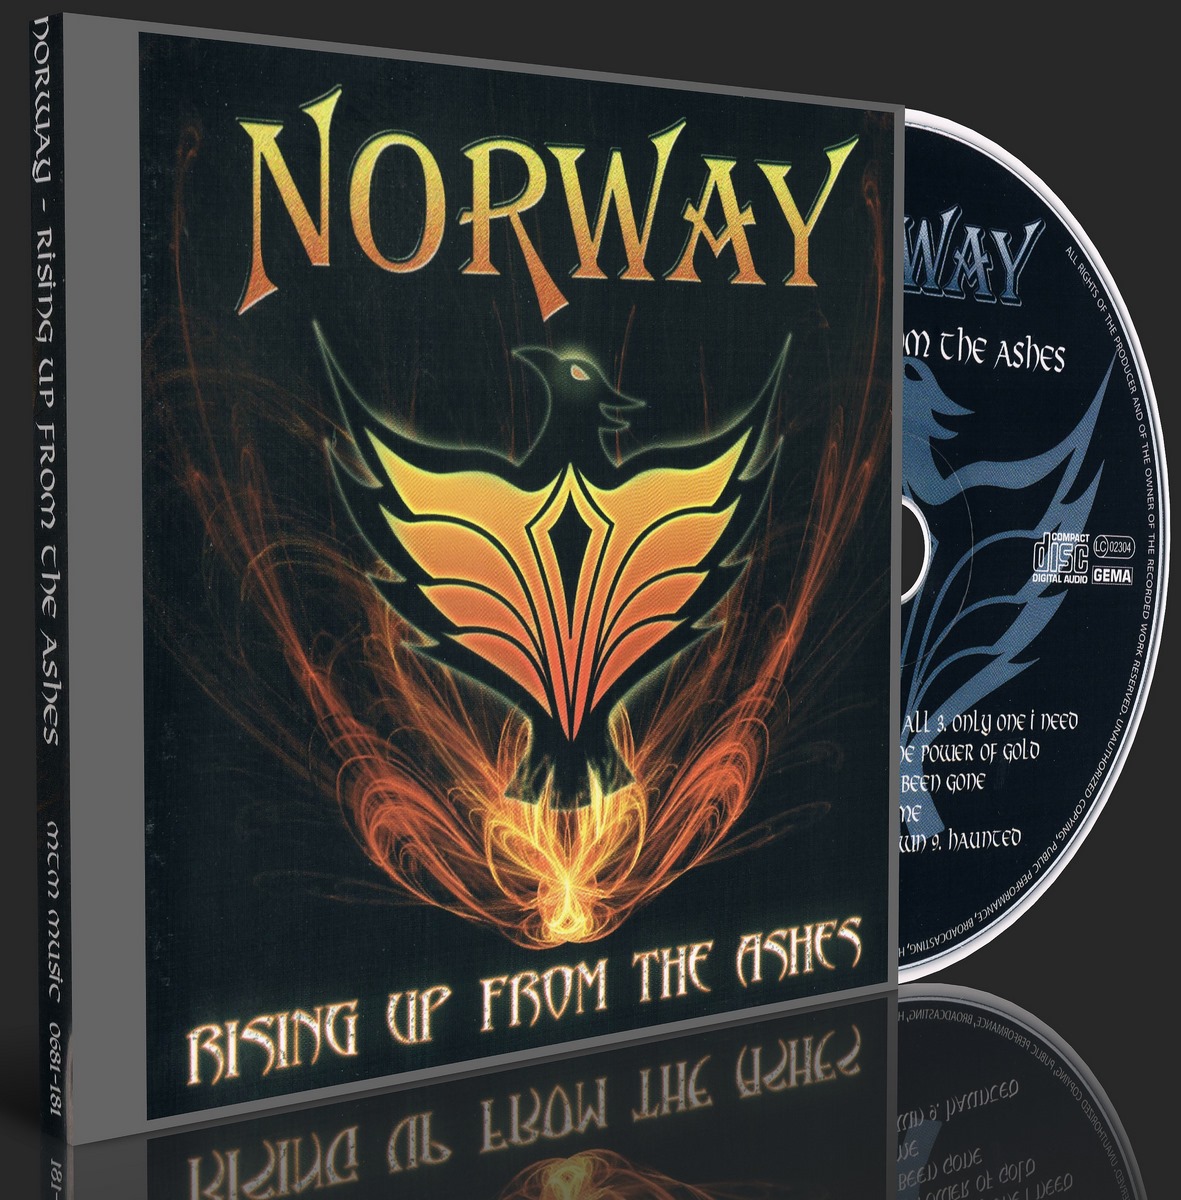 Norway - Rising Up From The Ashes (0681-181) (Копировать)